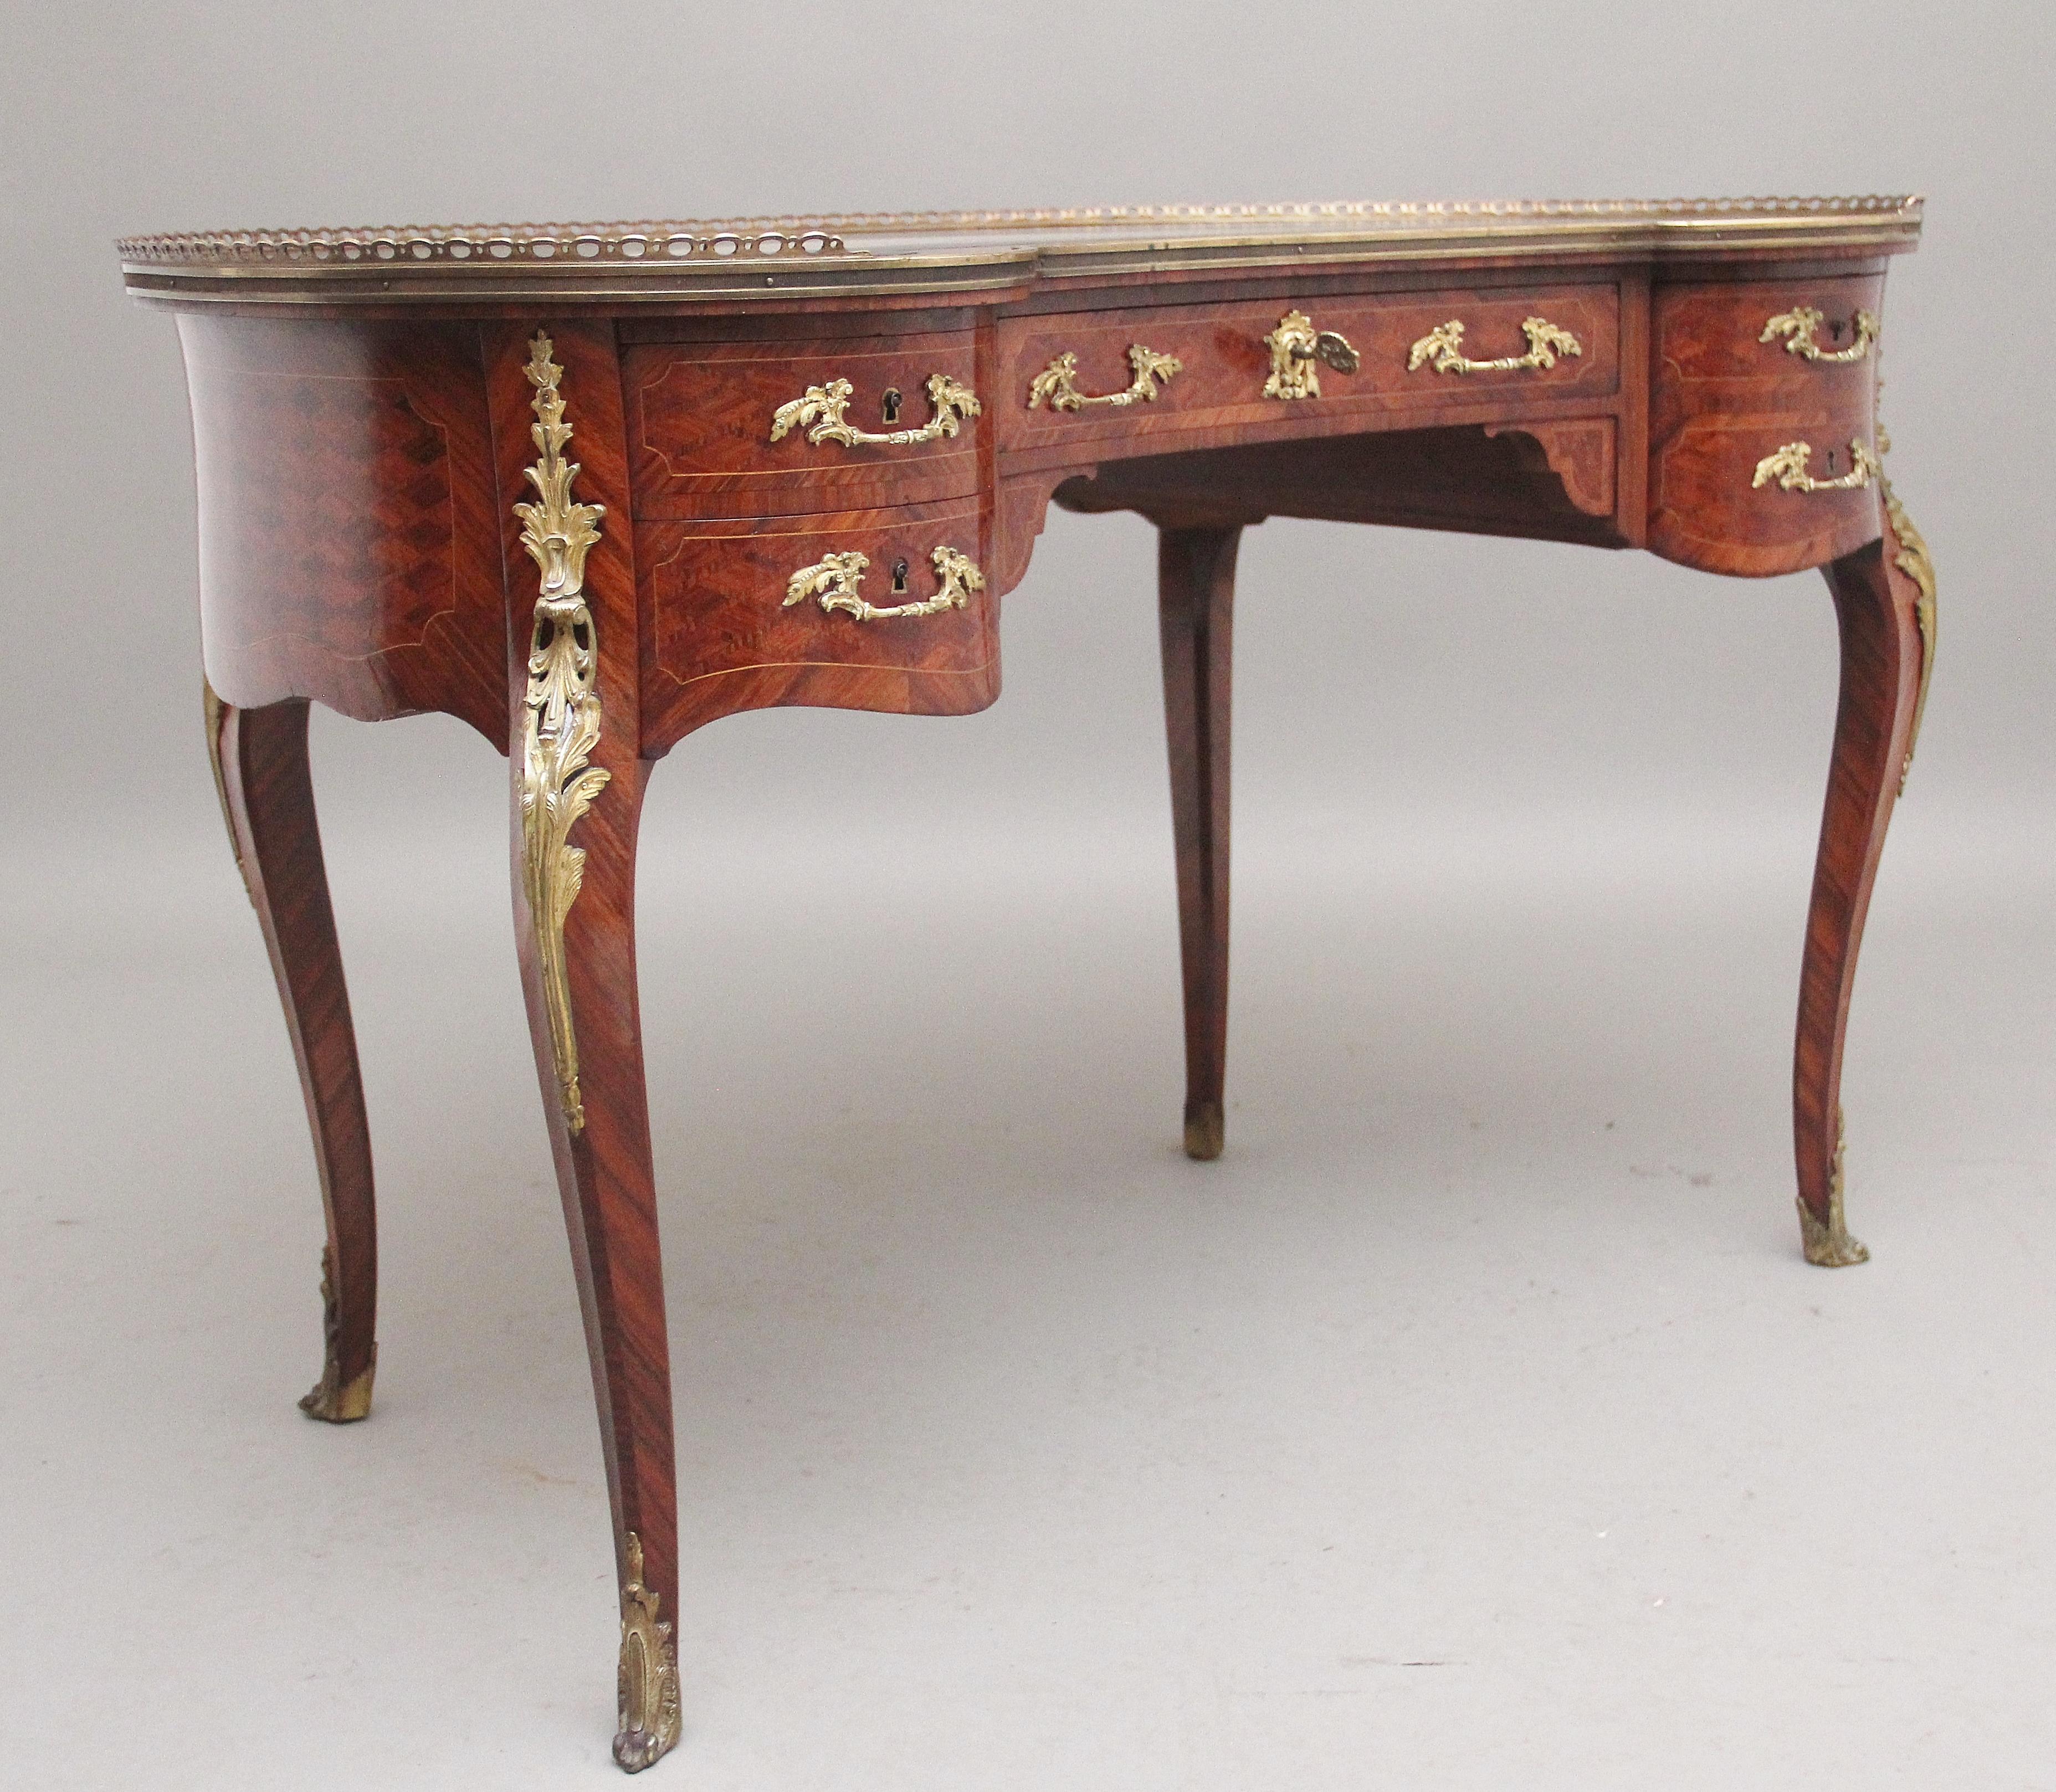 Late 19th Century 19th Century Freestanding French Parquetry and Kingwood Kidney Desk